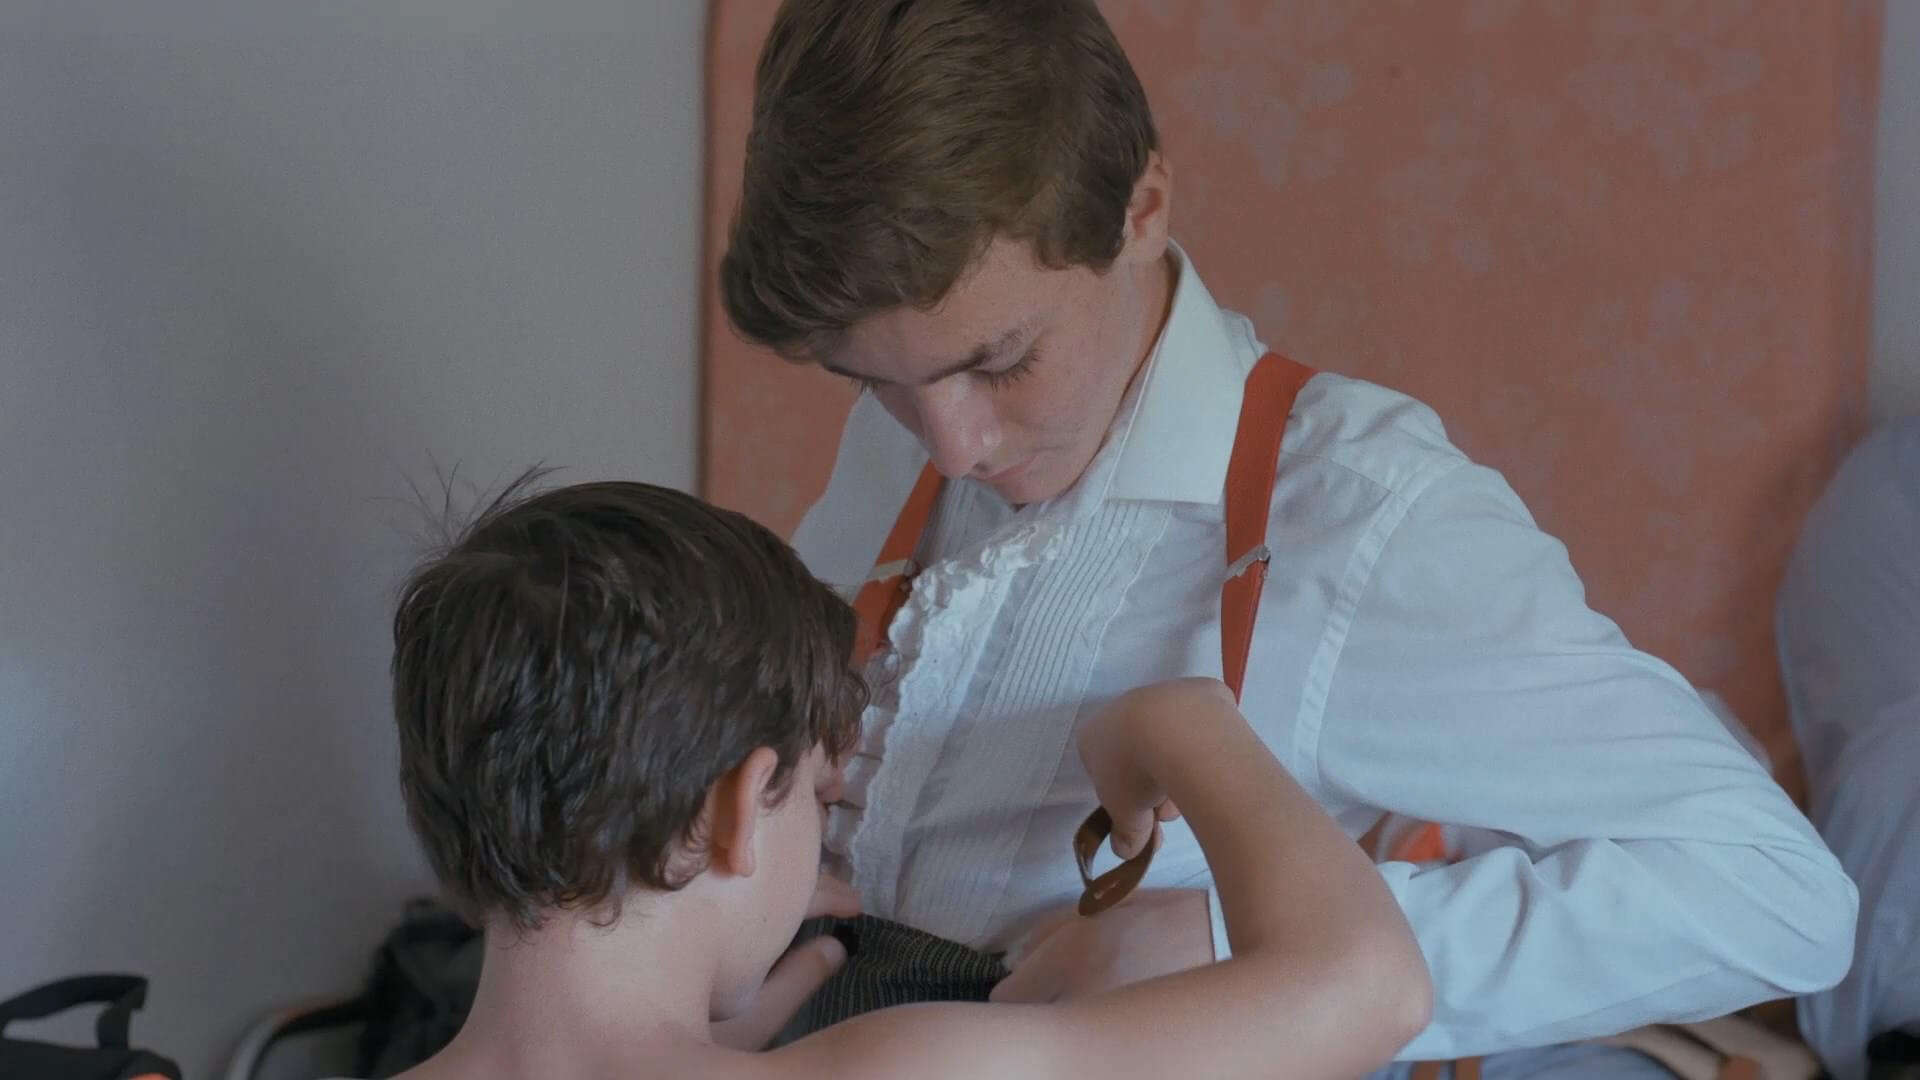 A still from The Boy and the Suit of Lights. One boy helps another fasten his red suspender to his pants. The boy in the suspenders wears a white button-down shirt underneath.